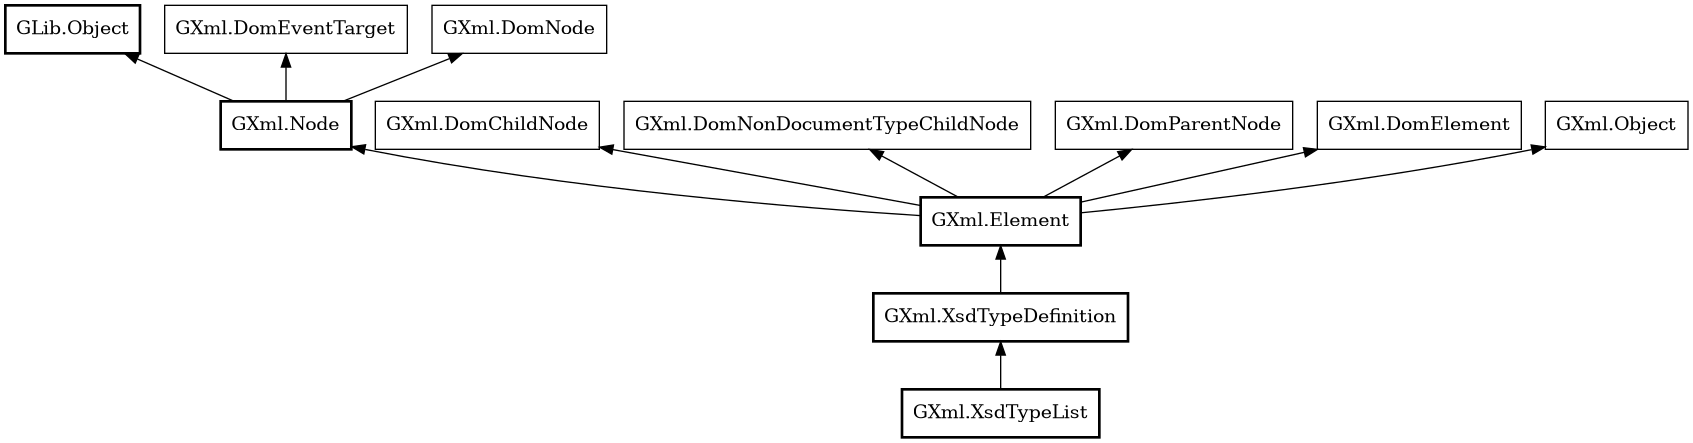 Object hierarchy for XsdTypeList